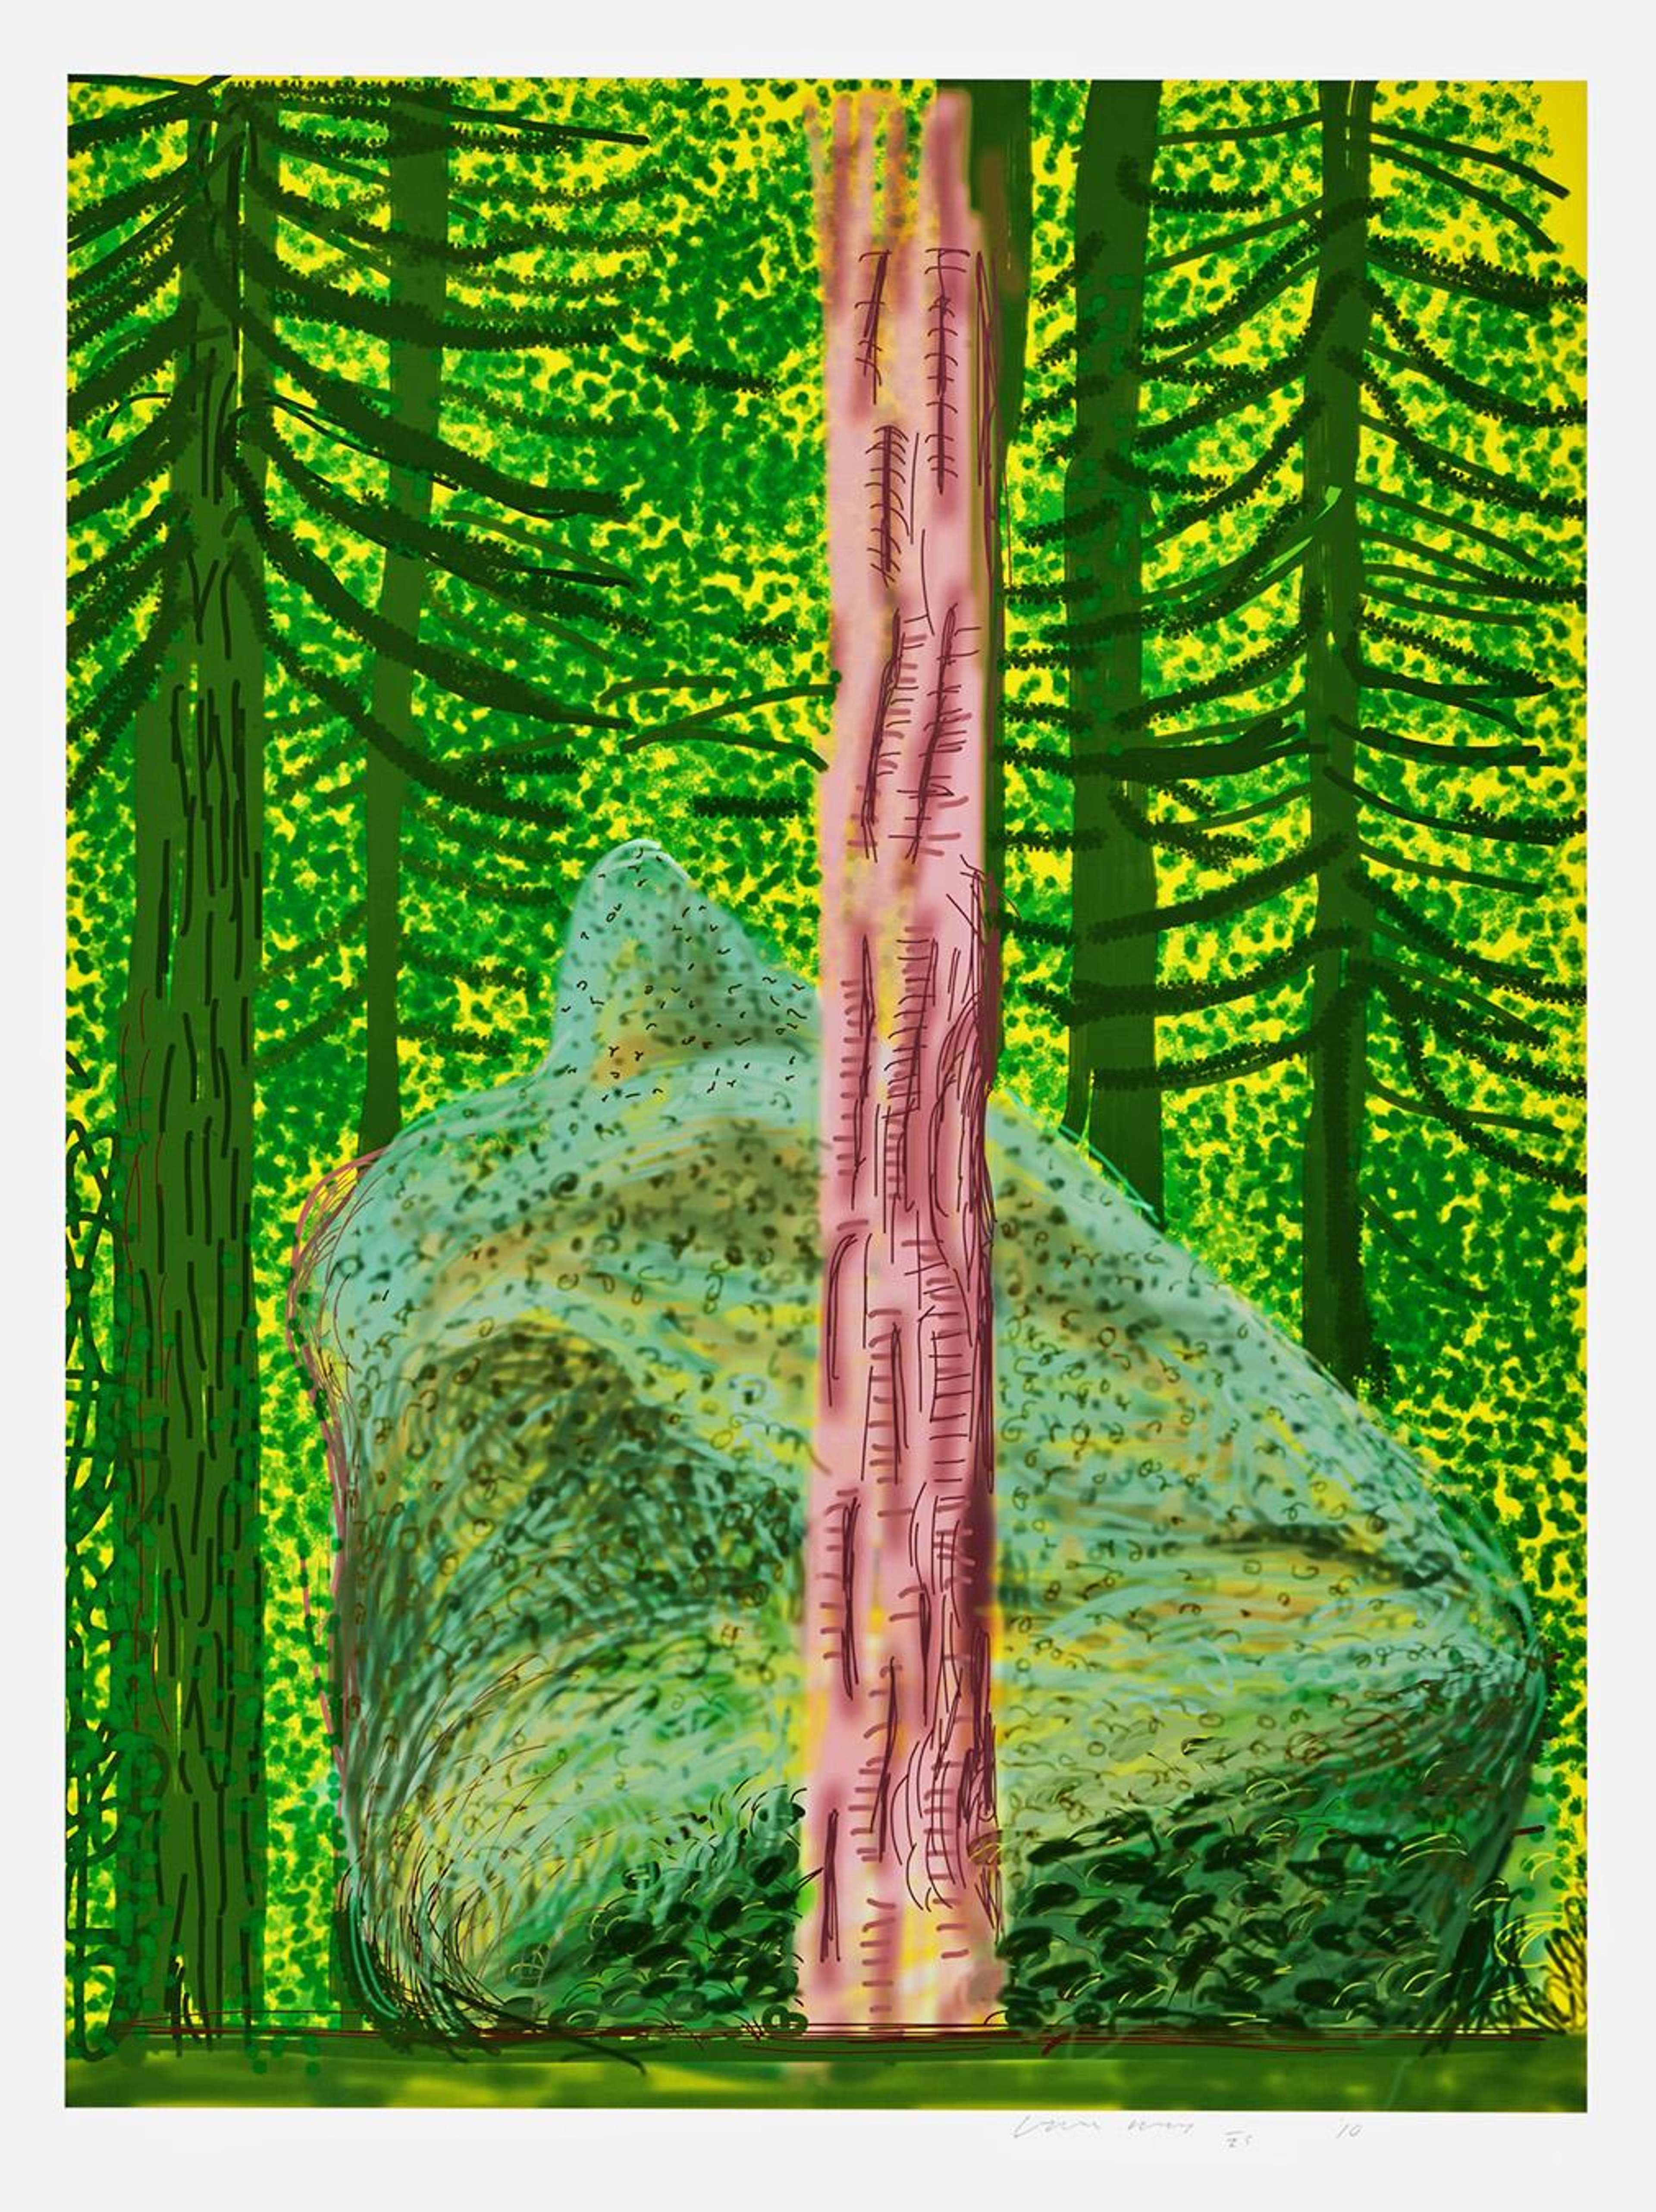 A forest view by David Hockney, with a tree partially obscuring a large boulder. The colour palette is mostly composed of greens, save for the central tree, which is depicted as in sunlight, in shades of brown.